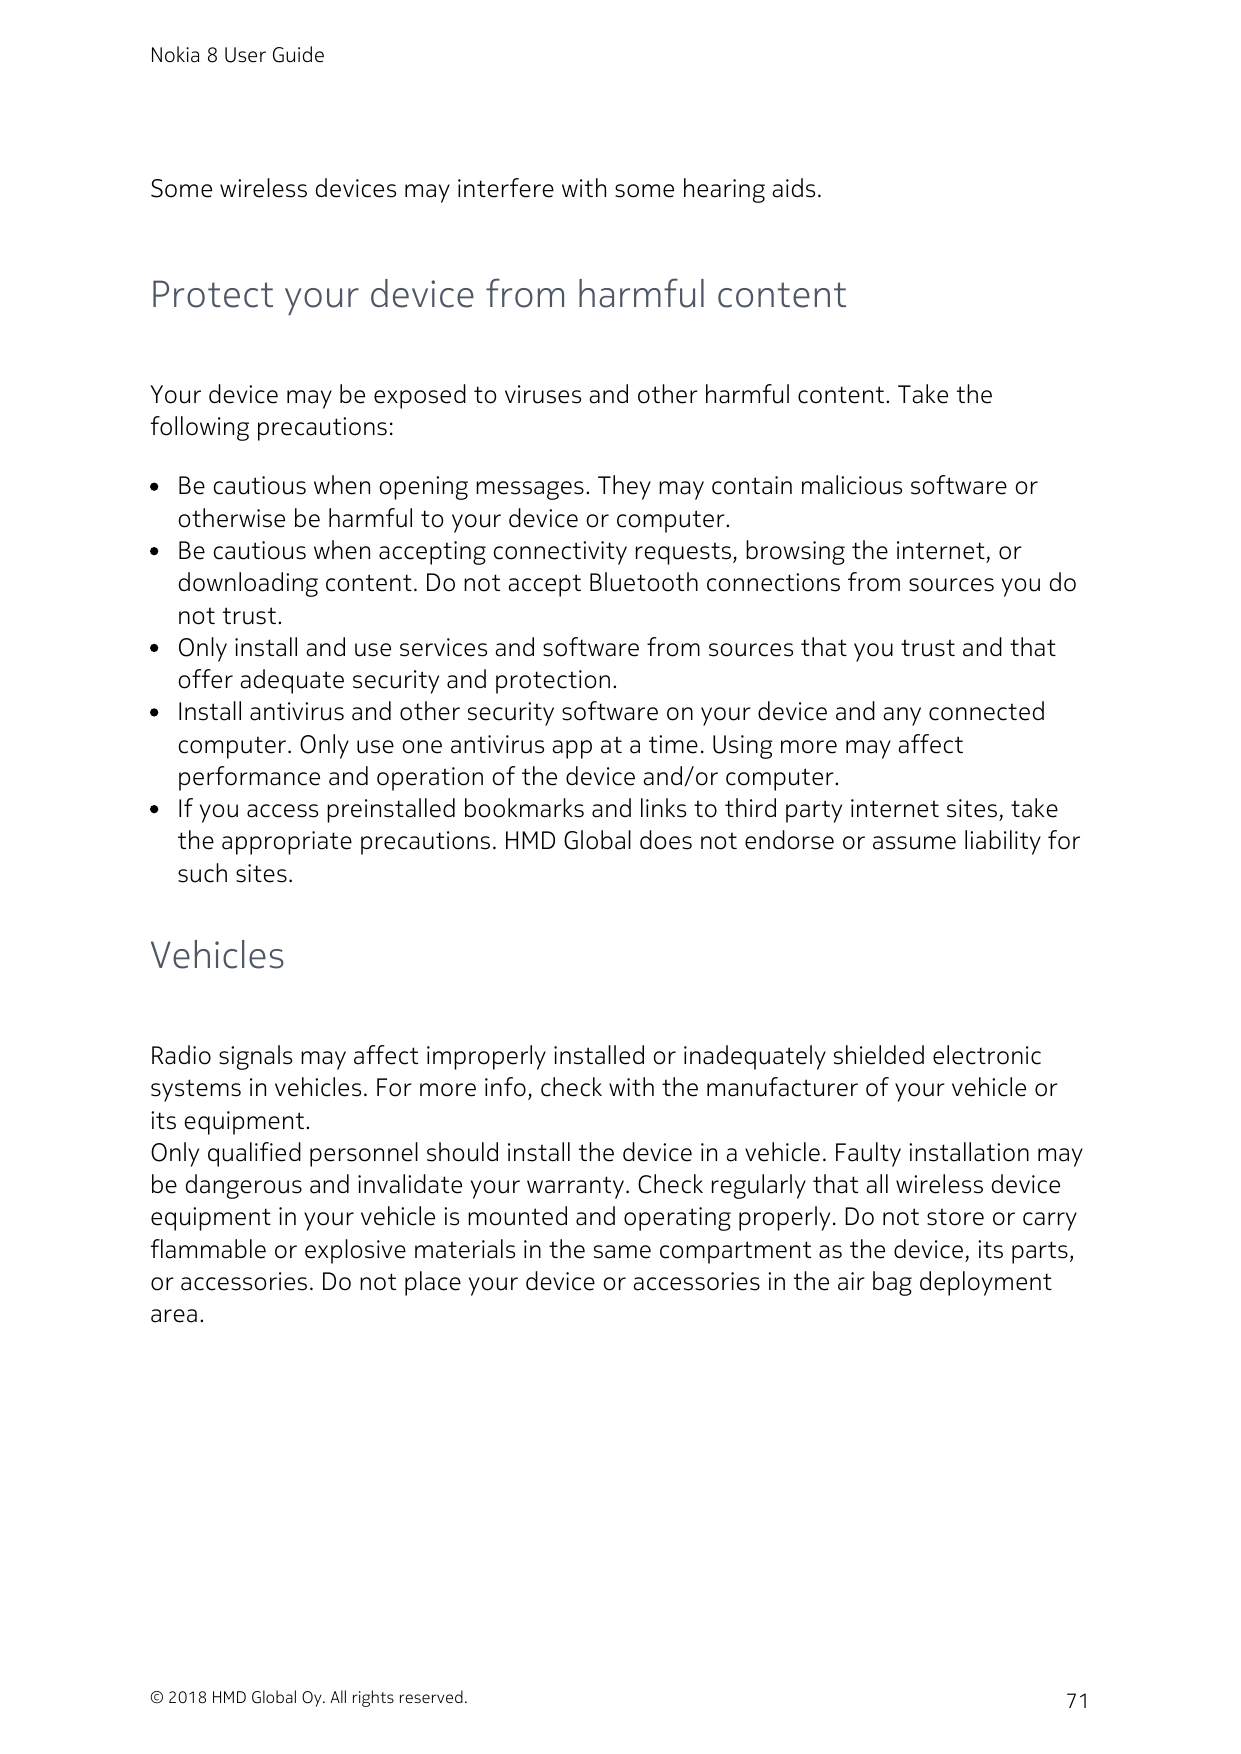 Nokia 8 User GuideSome wireless devices may interfere with some hearing aids.Protect your device from harmful contentYour device